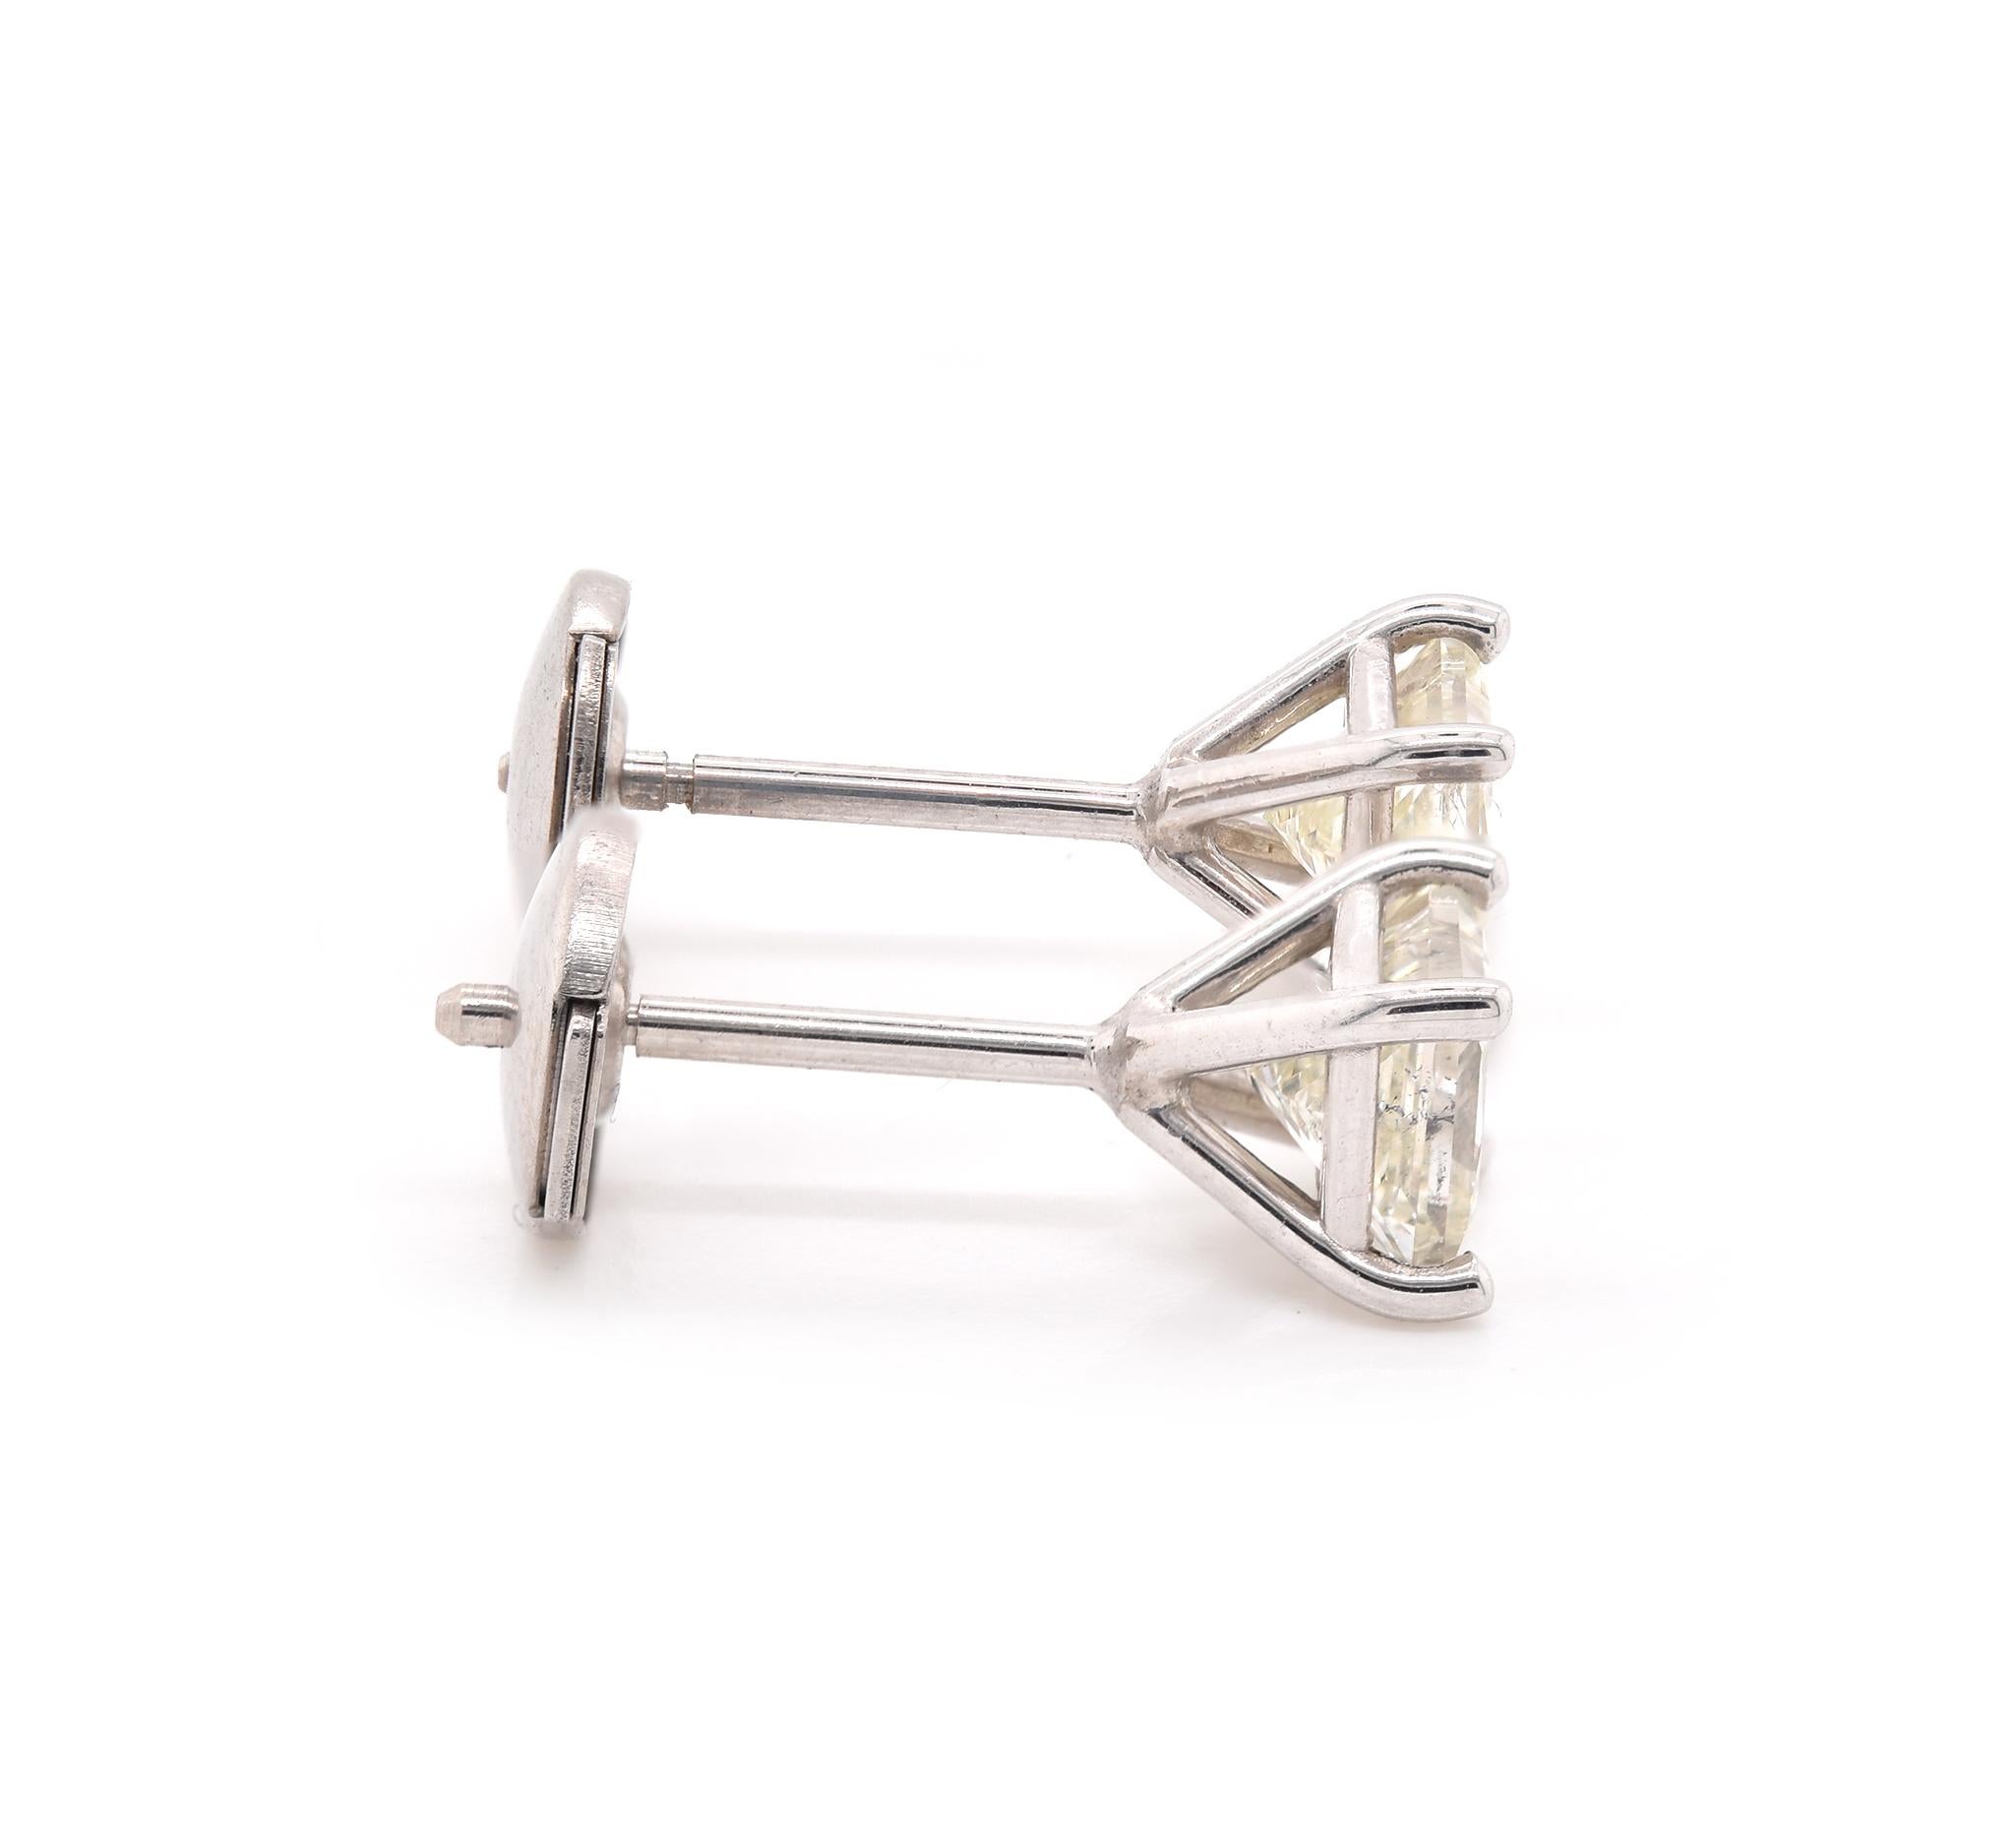 Material: 14k white gold
Diamond: 2 princess cut = 1.08cttw
Color: J
Clarity: SI2
Dimensions: earrings measure approximately  5.3mm in diameter
Fastenings: post with la pousette backs
Weight: 1.27 grams
